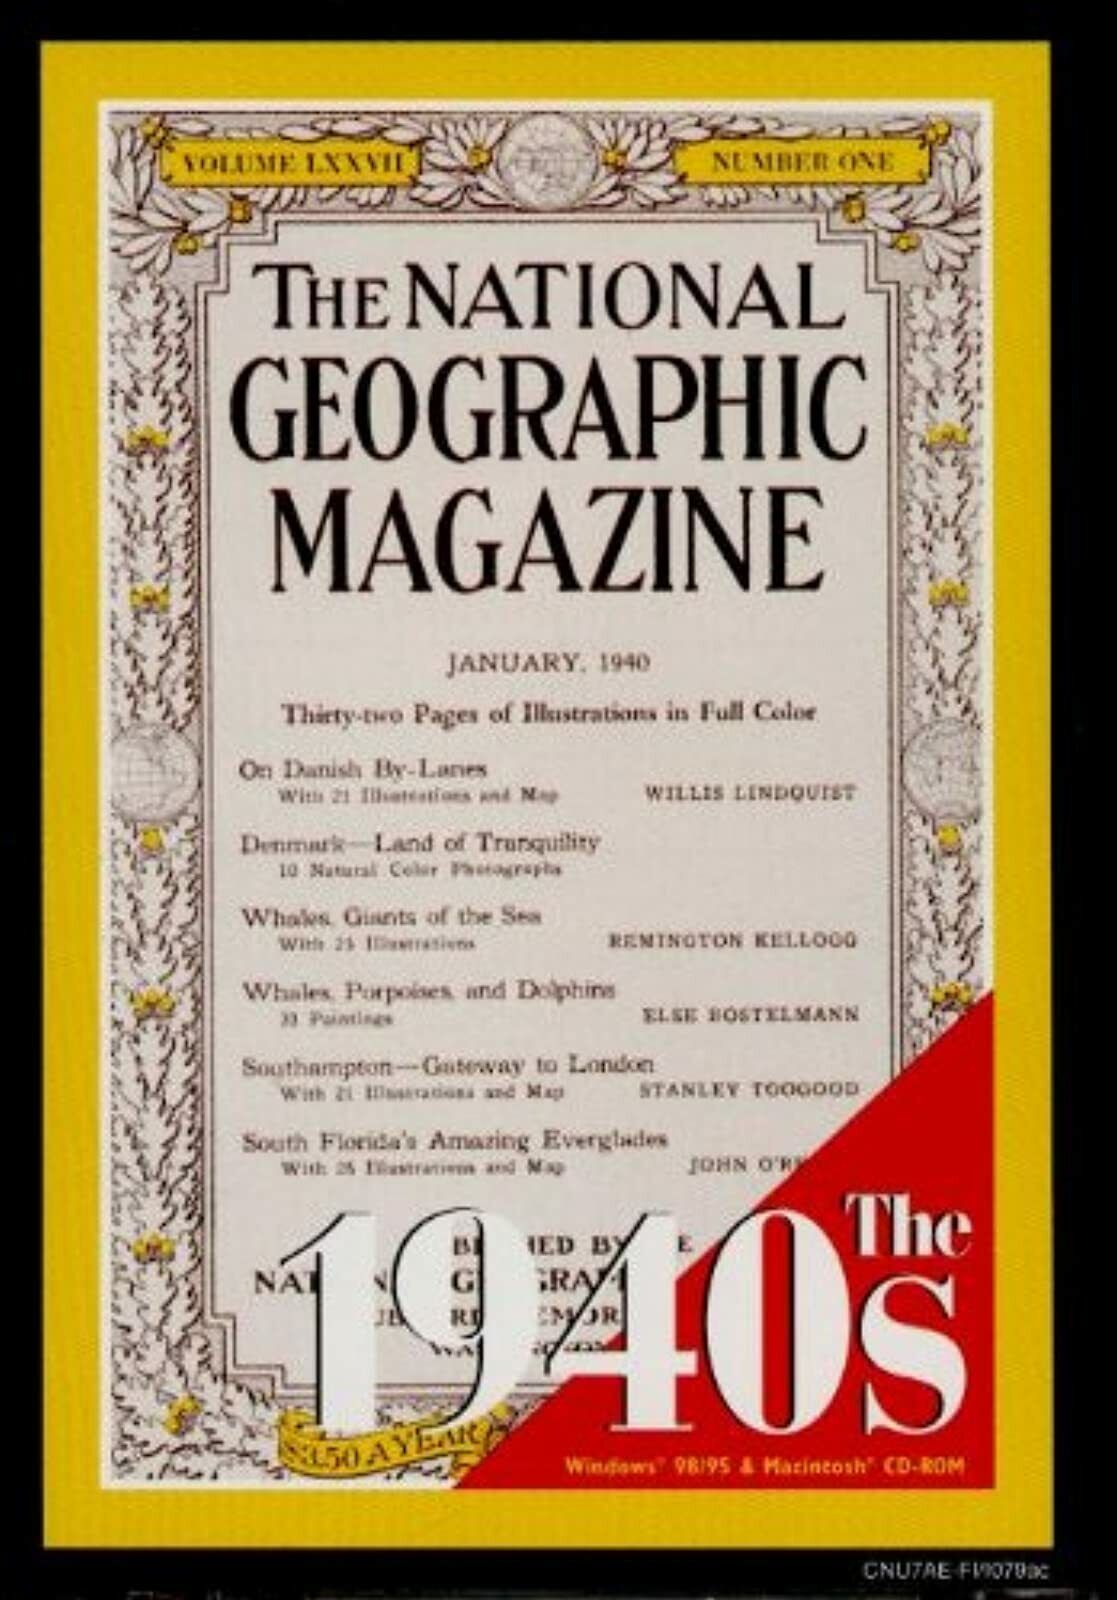 The National Geographic Magazine On Cd-Rom: The 1940S By National Geographic